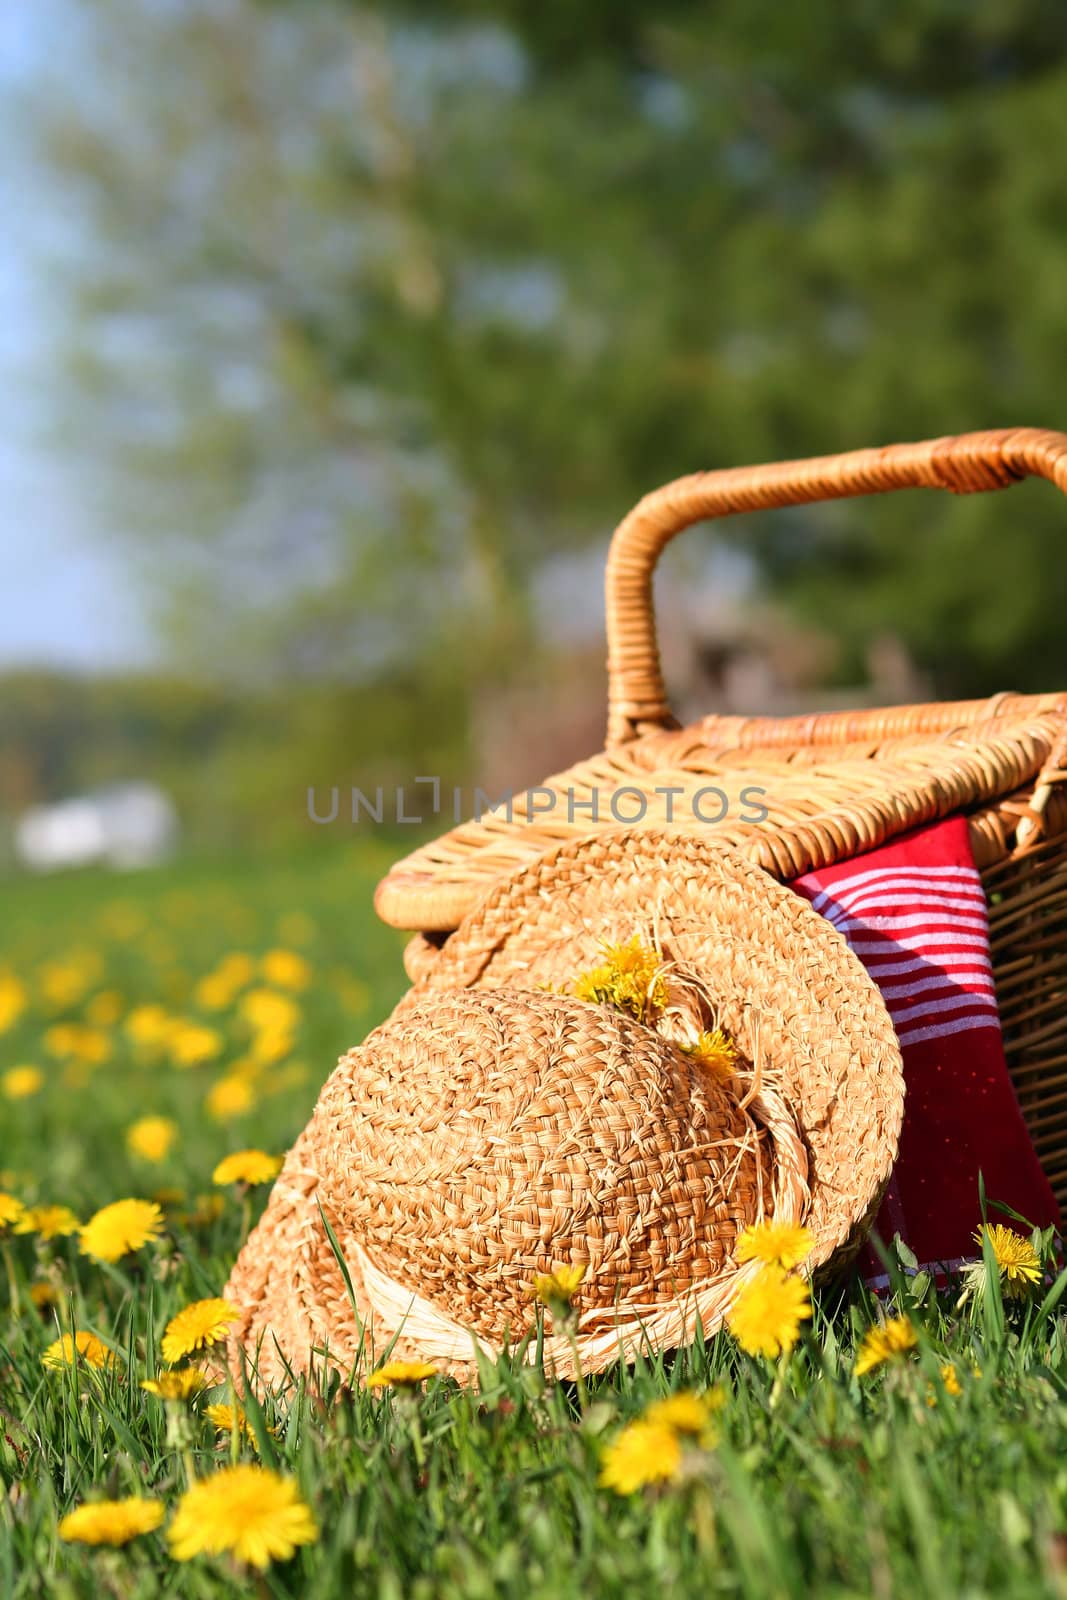 Picnic on the grass with wicker basket by Sandralise